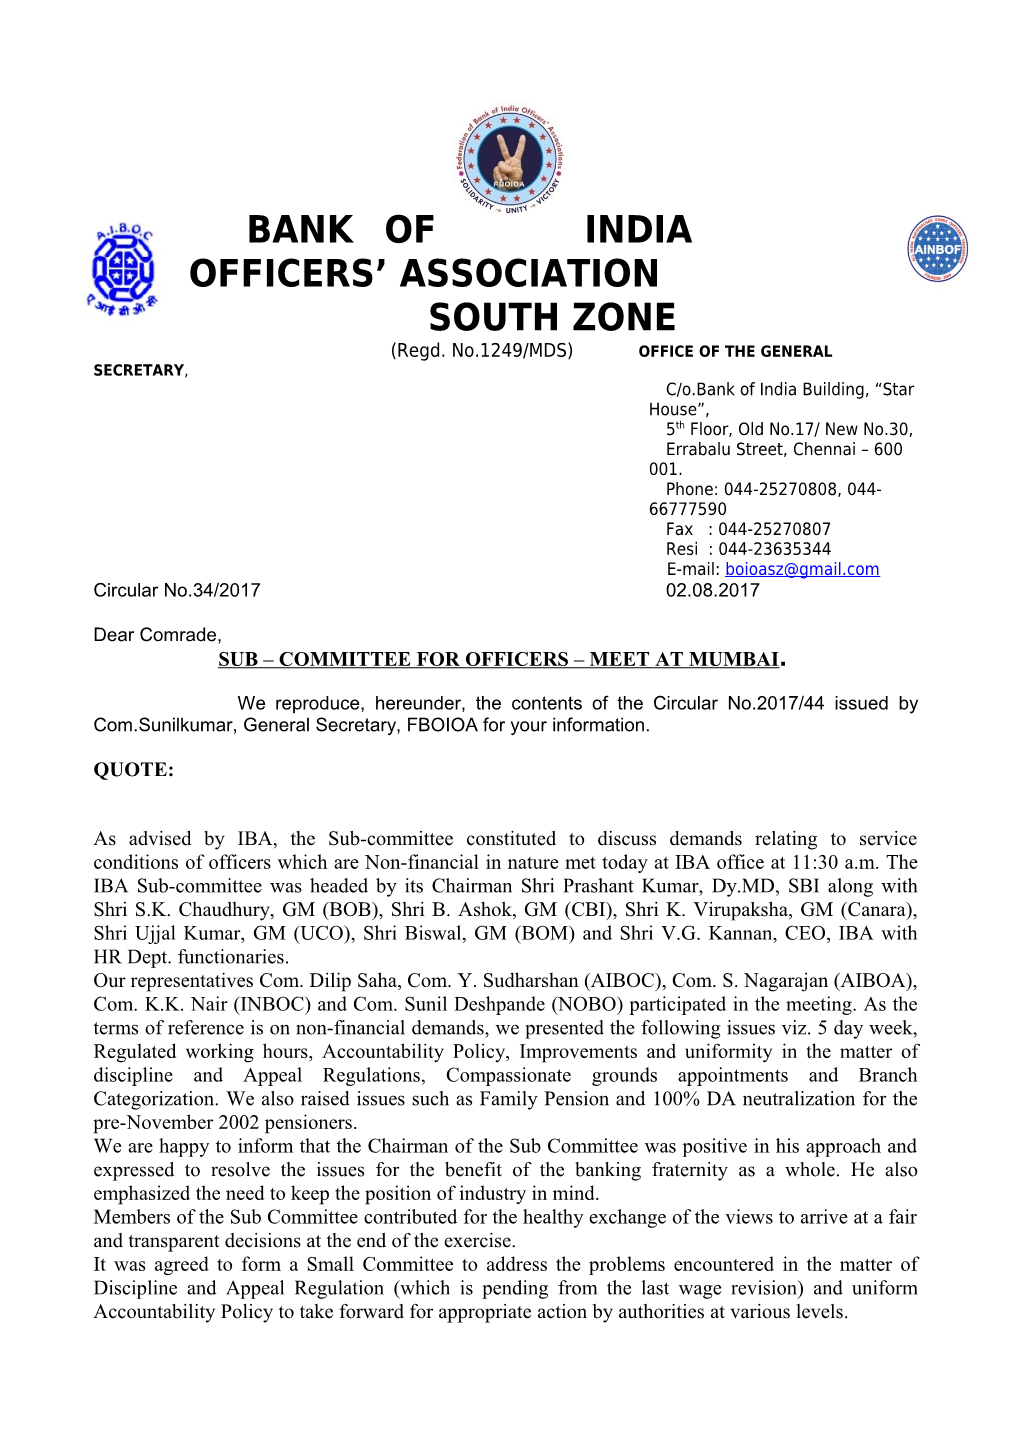 Bank of India Officers Association s3